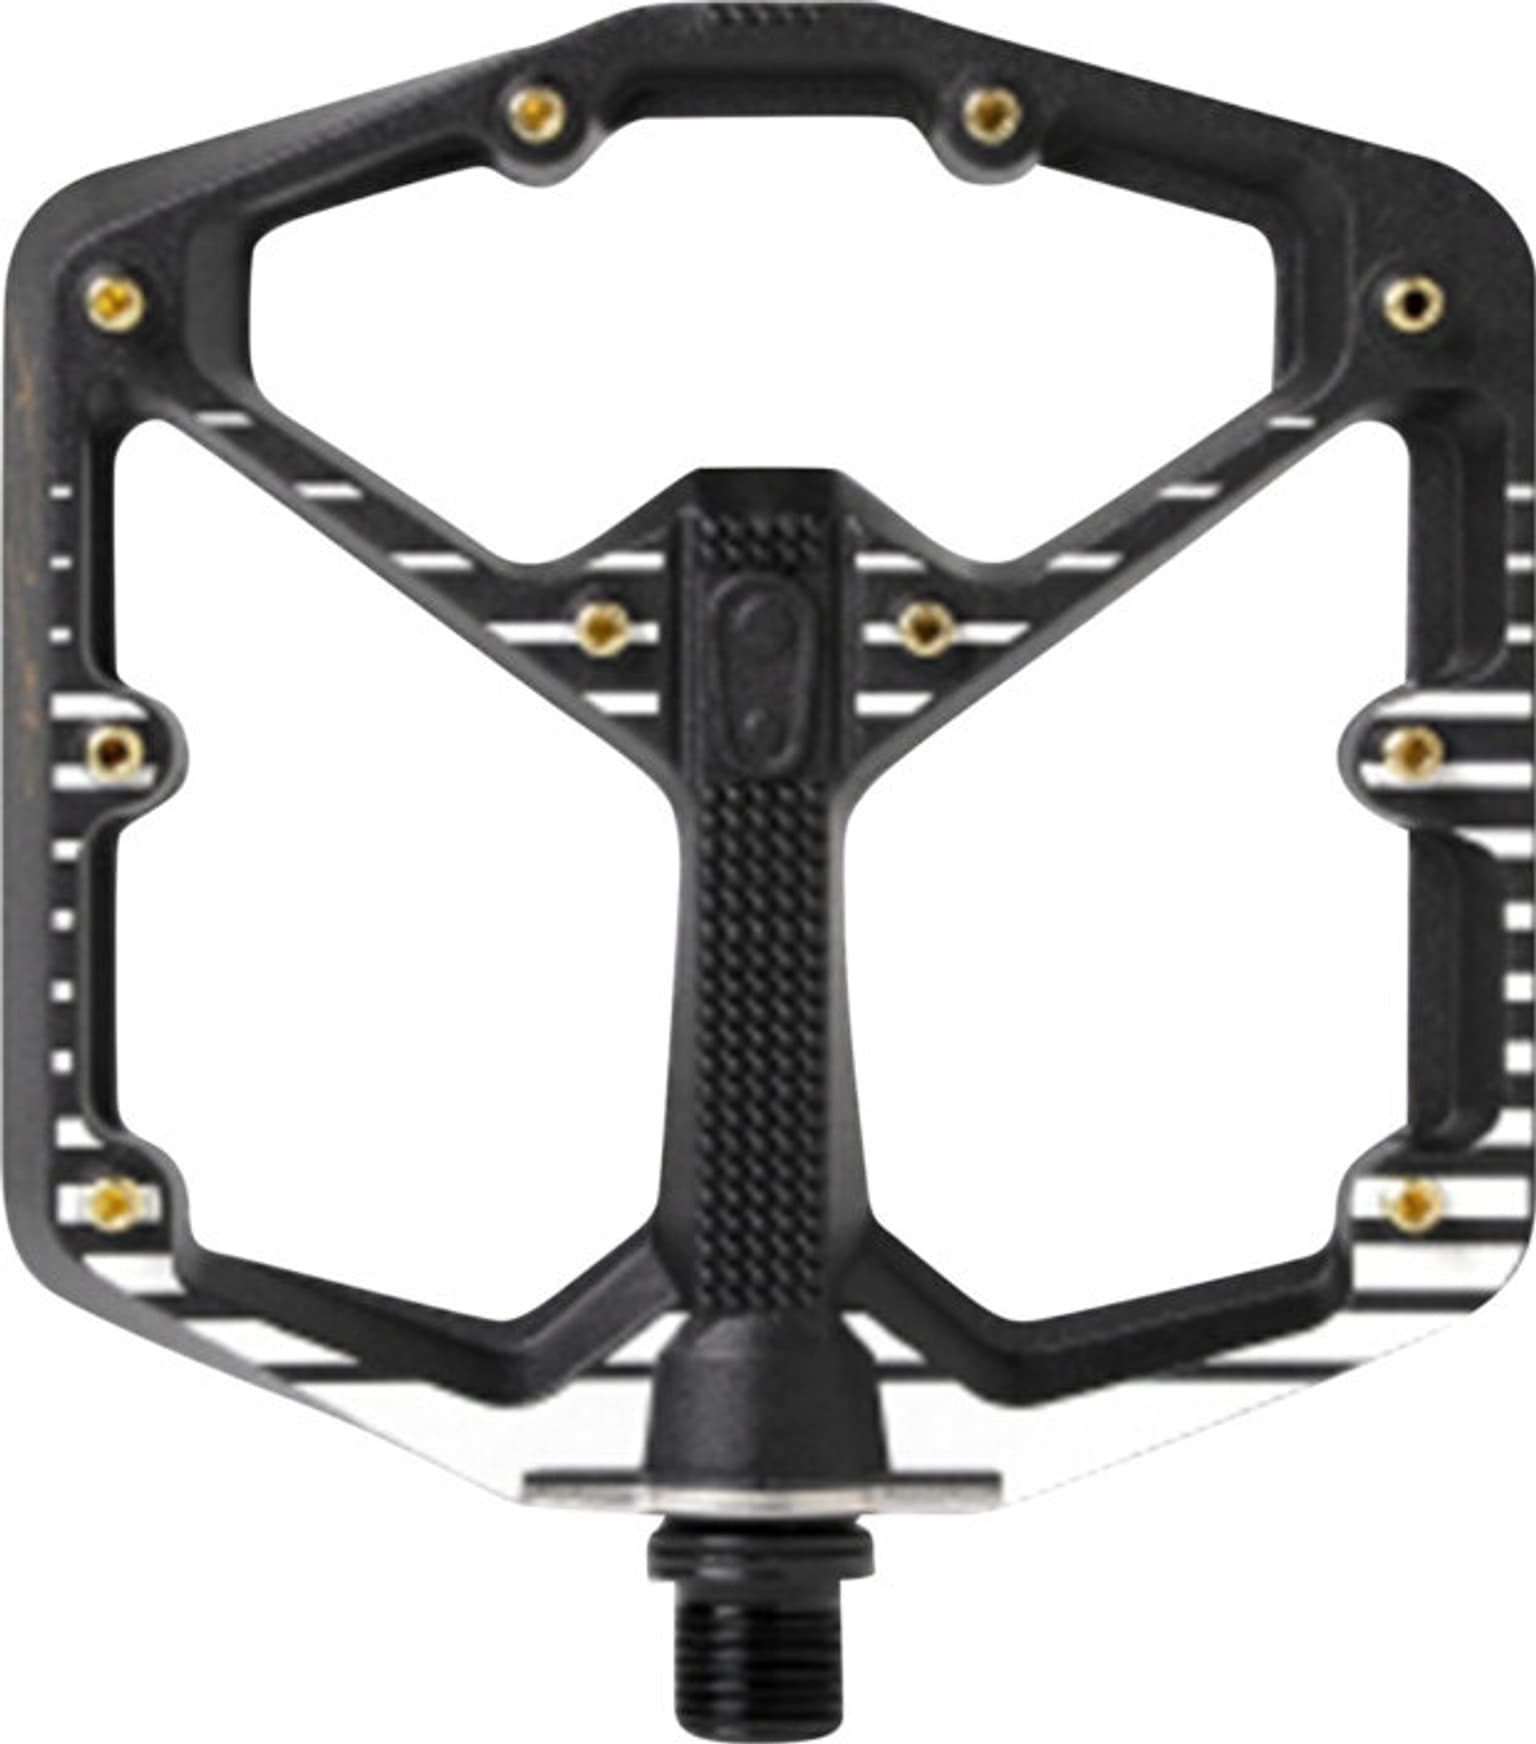 crankbrothers crankbrothers Pedal Stamp 7 large Fabio Wibmer Signature Edition Pedale nero 1